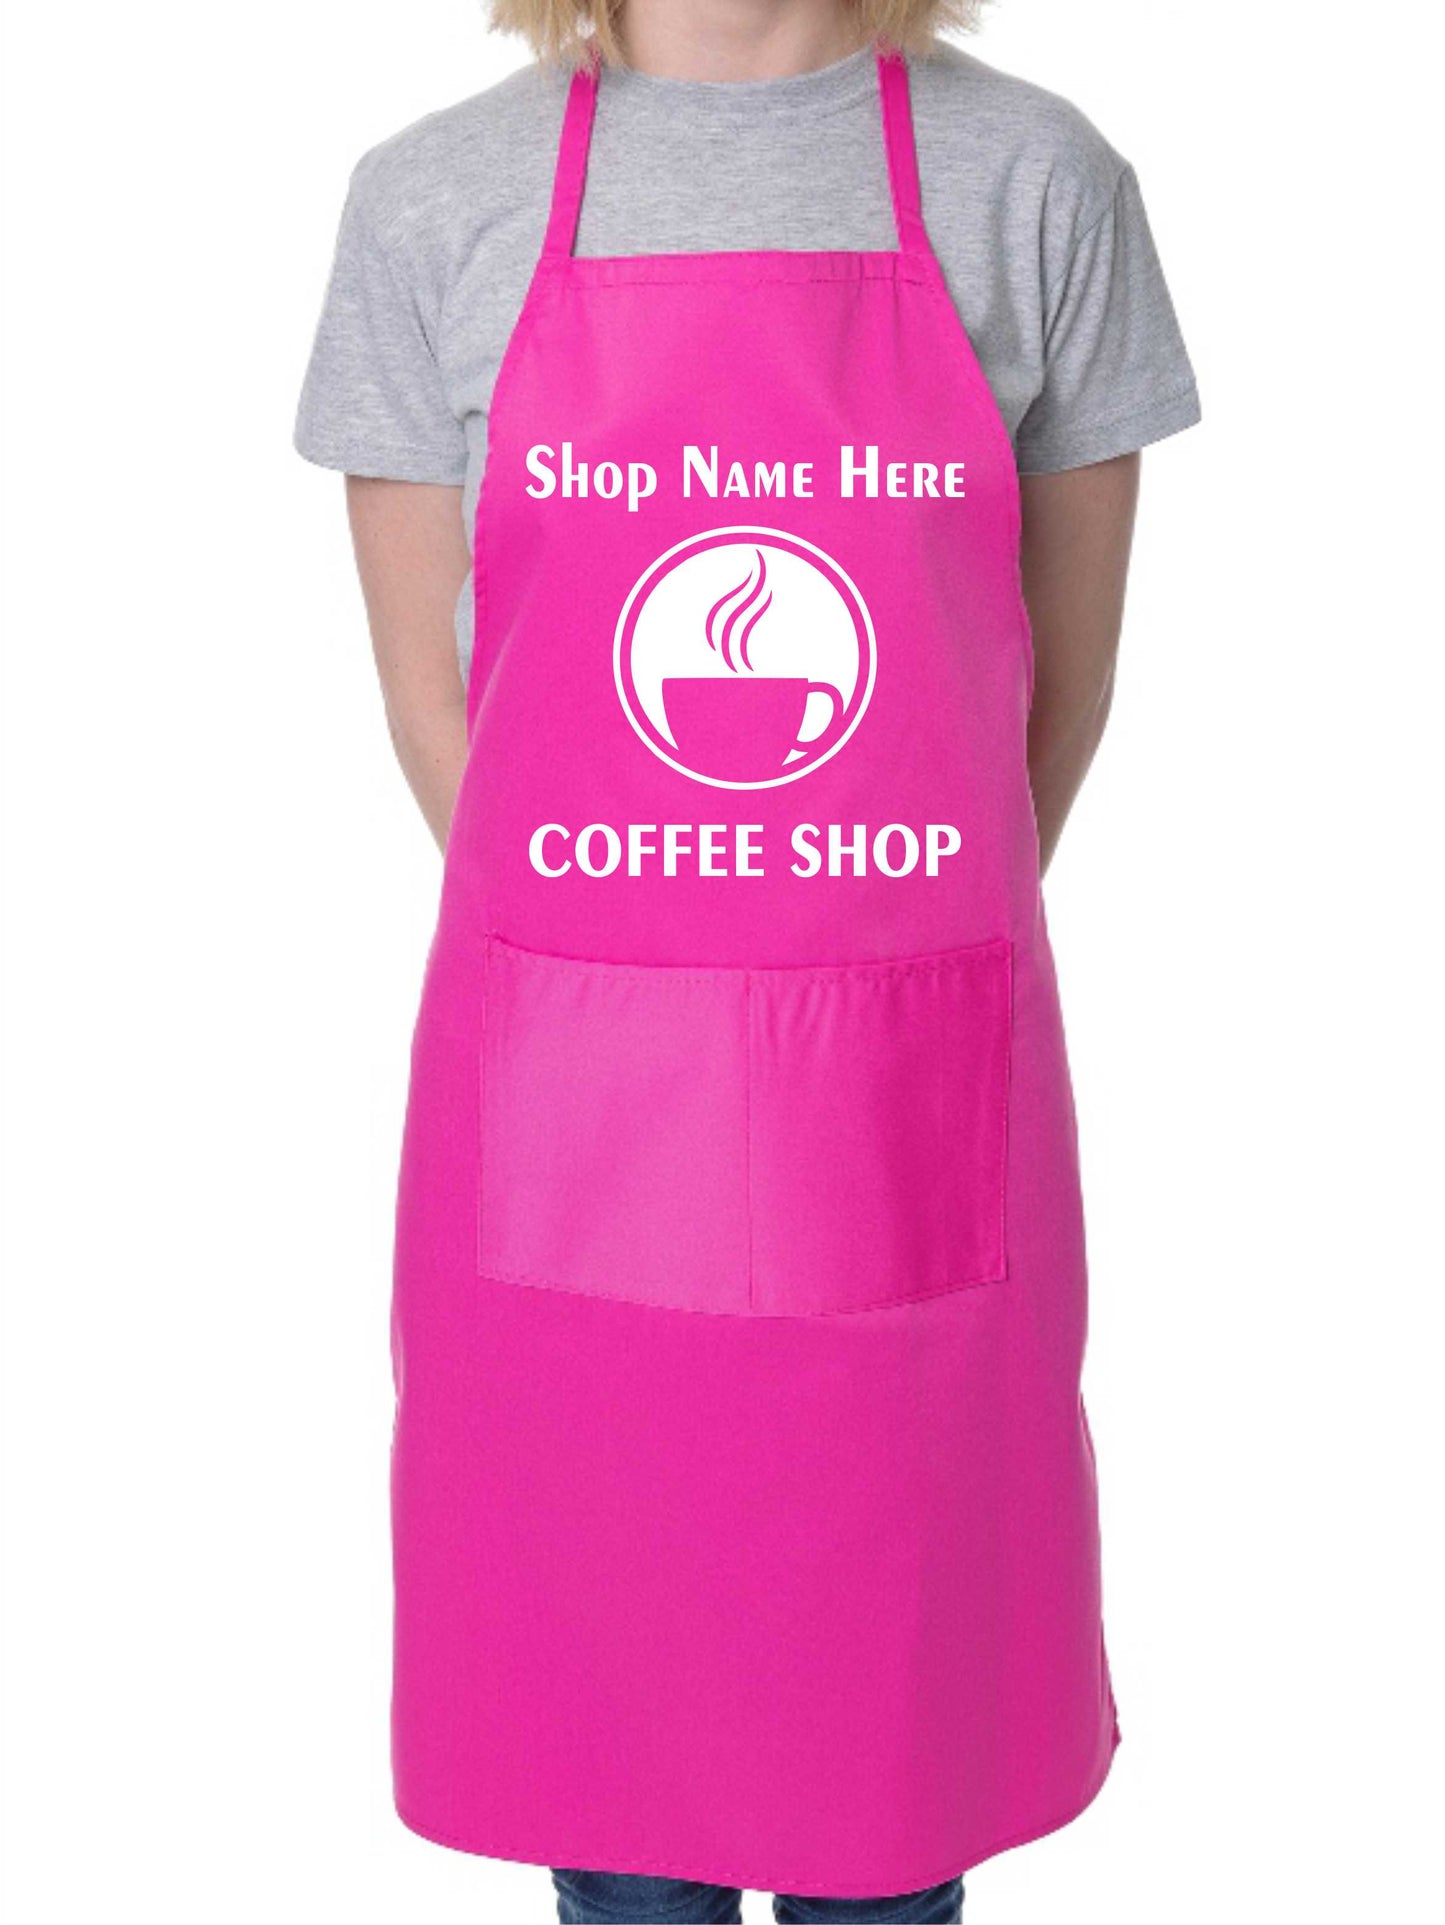 Personalised Apron Coffee Shop Restaurant Add Your Shop Name here